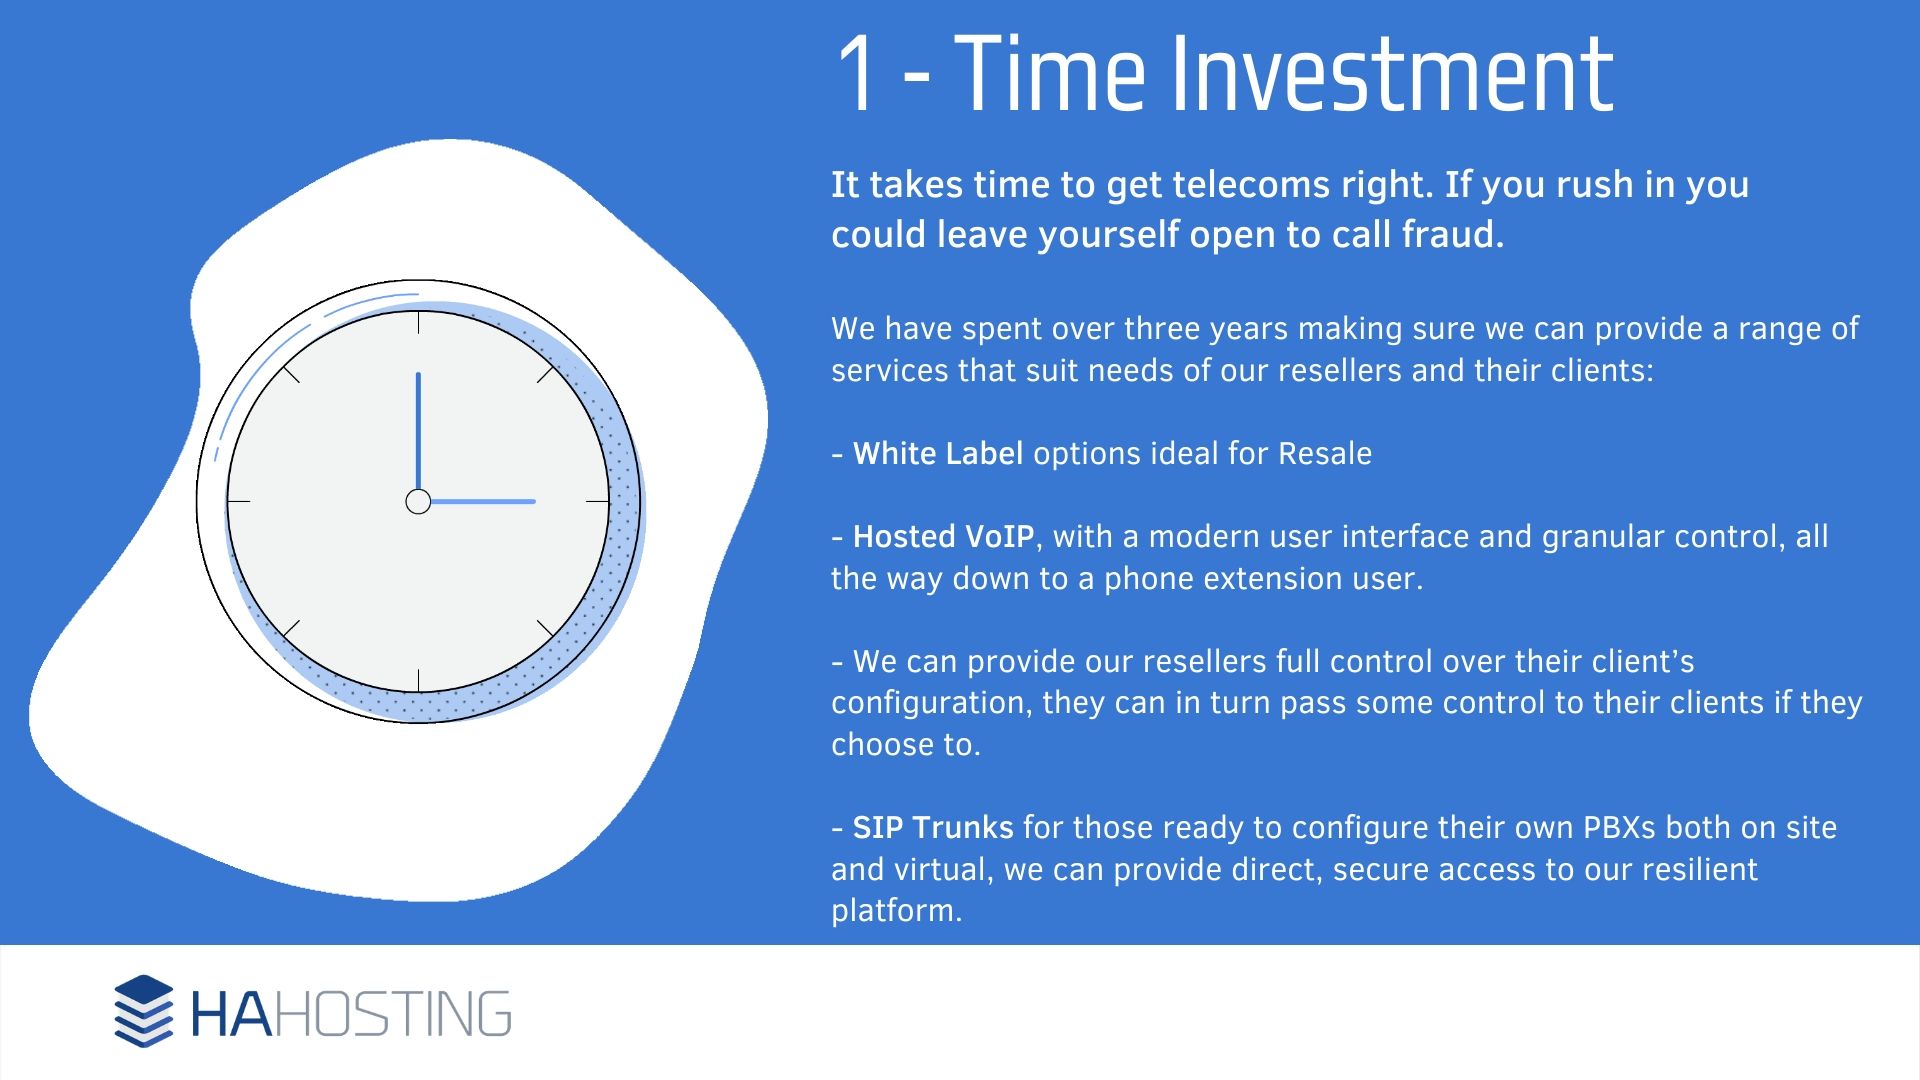 Time Investment - t takes time to get telecoms right. If you rush in you could leave yourself open to call fraud. We have spent over three years making sure we can provide a range of services that suit needs of our resellers and their clients: - White Label options ideal for Resale - Hosted VoIP, with a modern user interface and granular control, all the way down to a phone extension user. - We can provide our resellers full control over their client’s configuration, they can in turn pass some control to their clients if they choose to. - SIP Trunks for those ready to configure their own PBXs both on site and virtual, we can provide direct, secure access to our resilient platform.